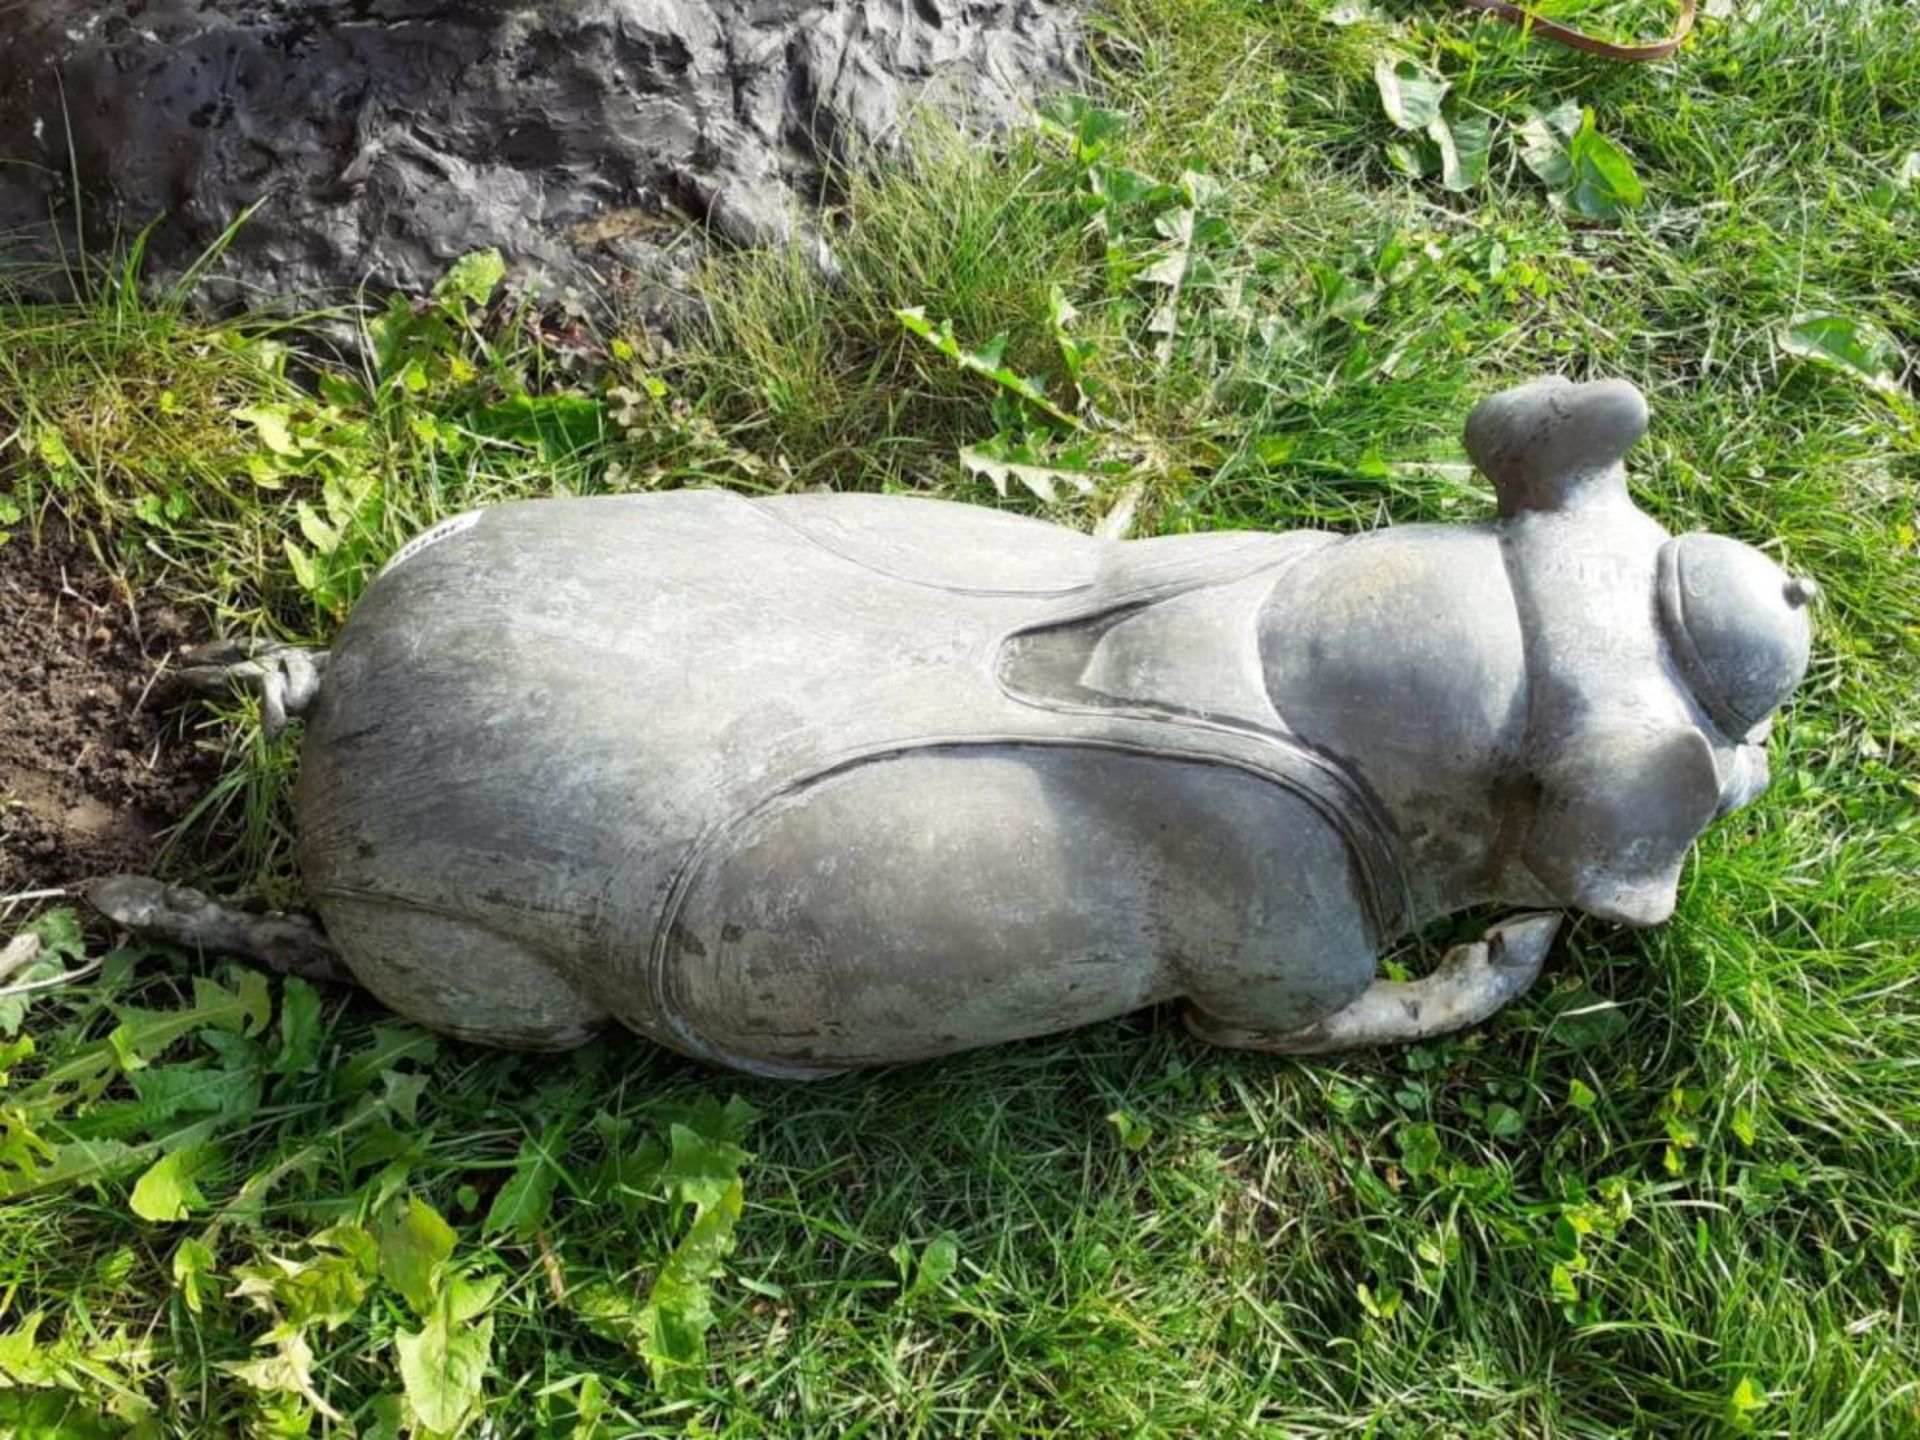 1 x Lazy Pig Metal Garden Statue - Dimensions: L 80cm x 30 x height 30cm - Ref: JB101 - Pre-Owned - - Image 6 of 8